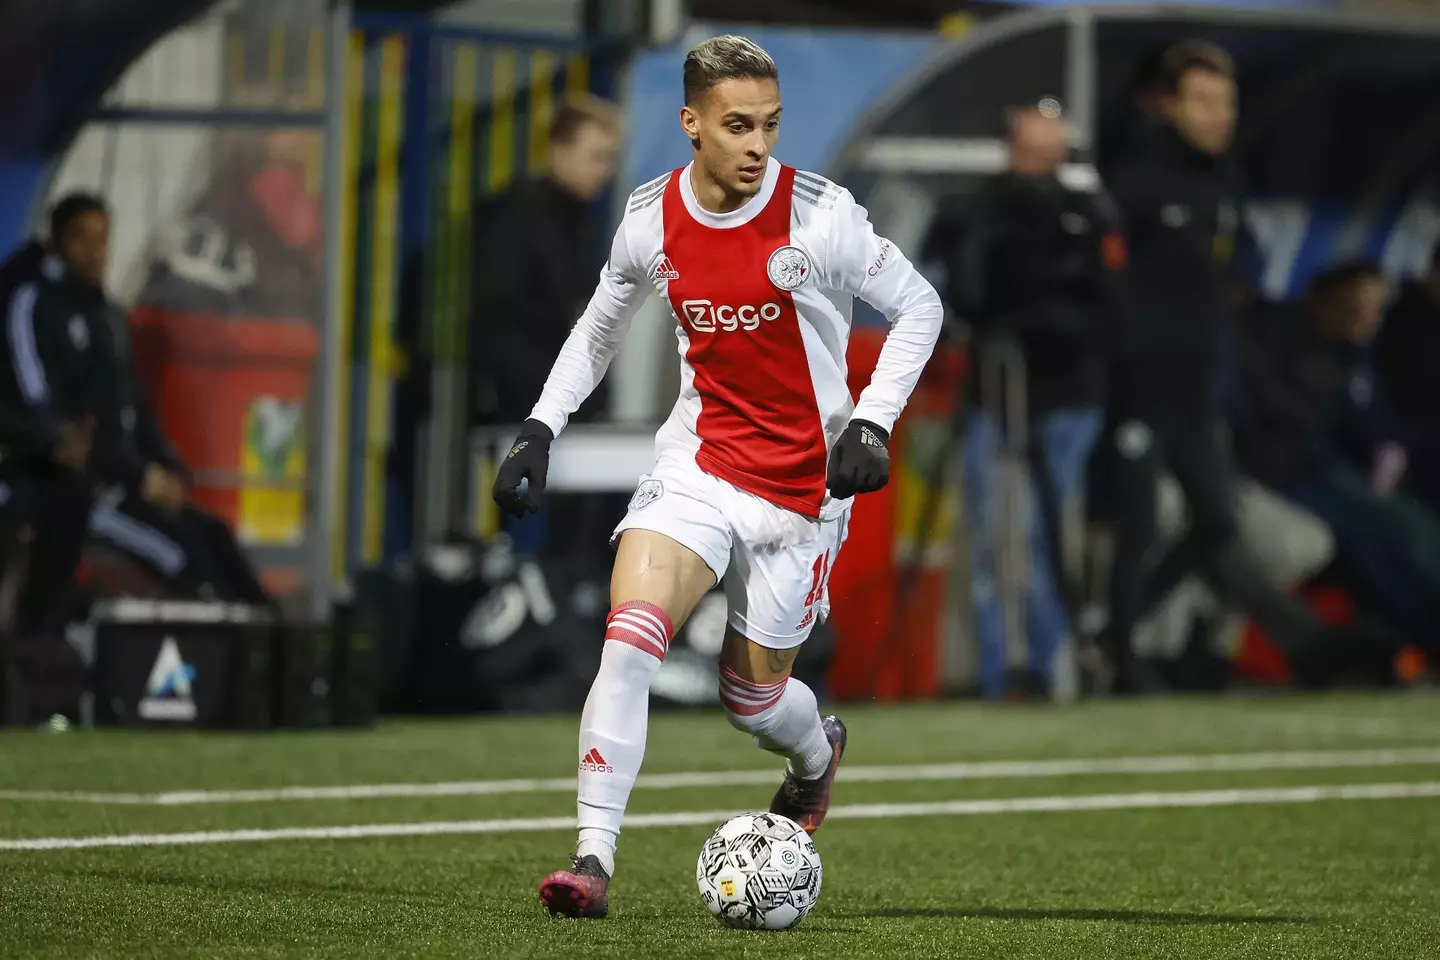 United are set to pay up to £85m for Ajax winger Antony (Image: Alamy)